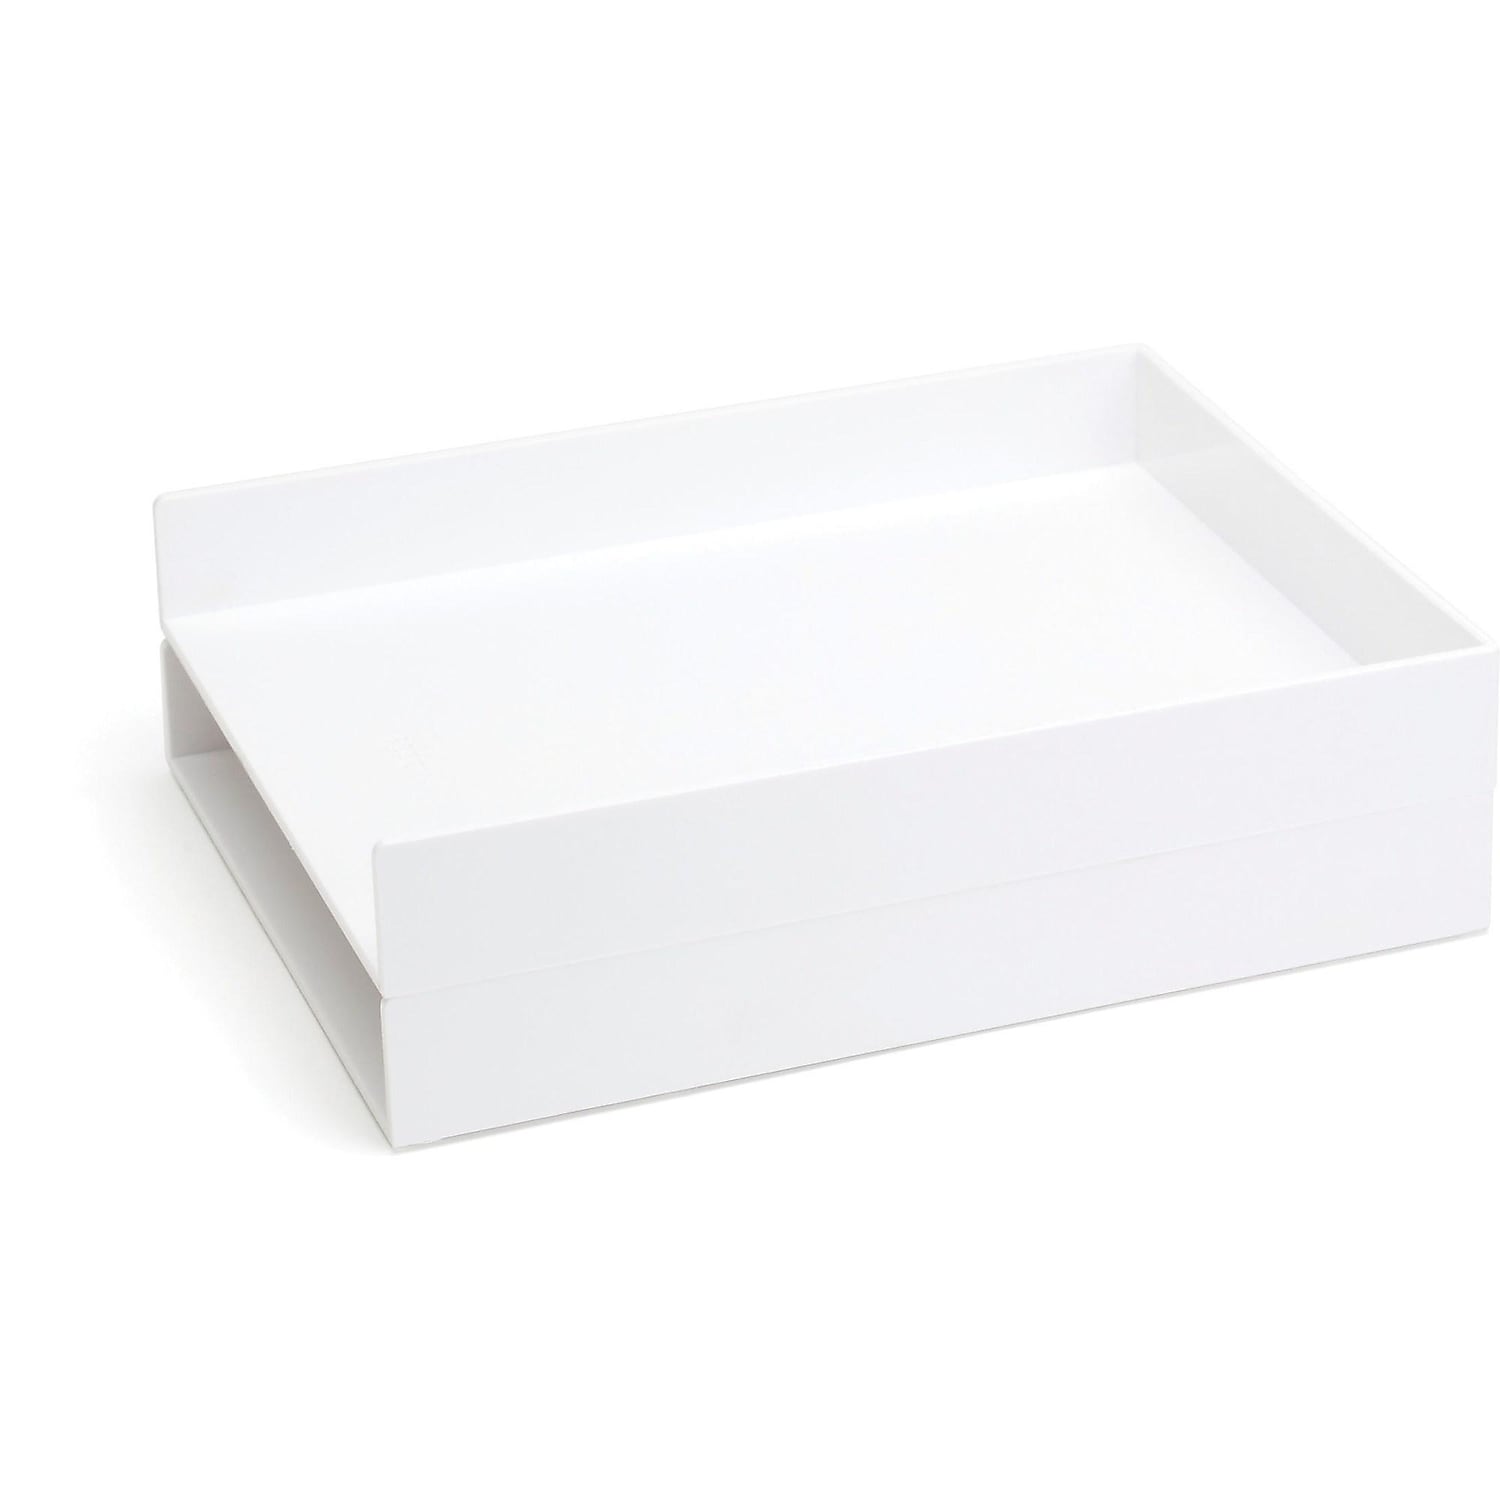 Poppin Front Loading Letter Trays White 2/Pack 100212 - image 3 of 3